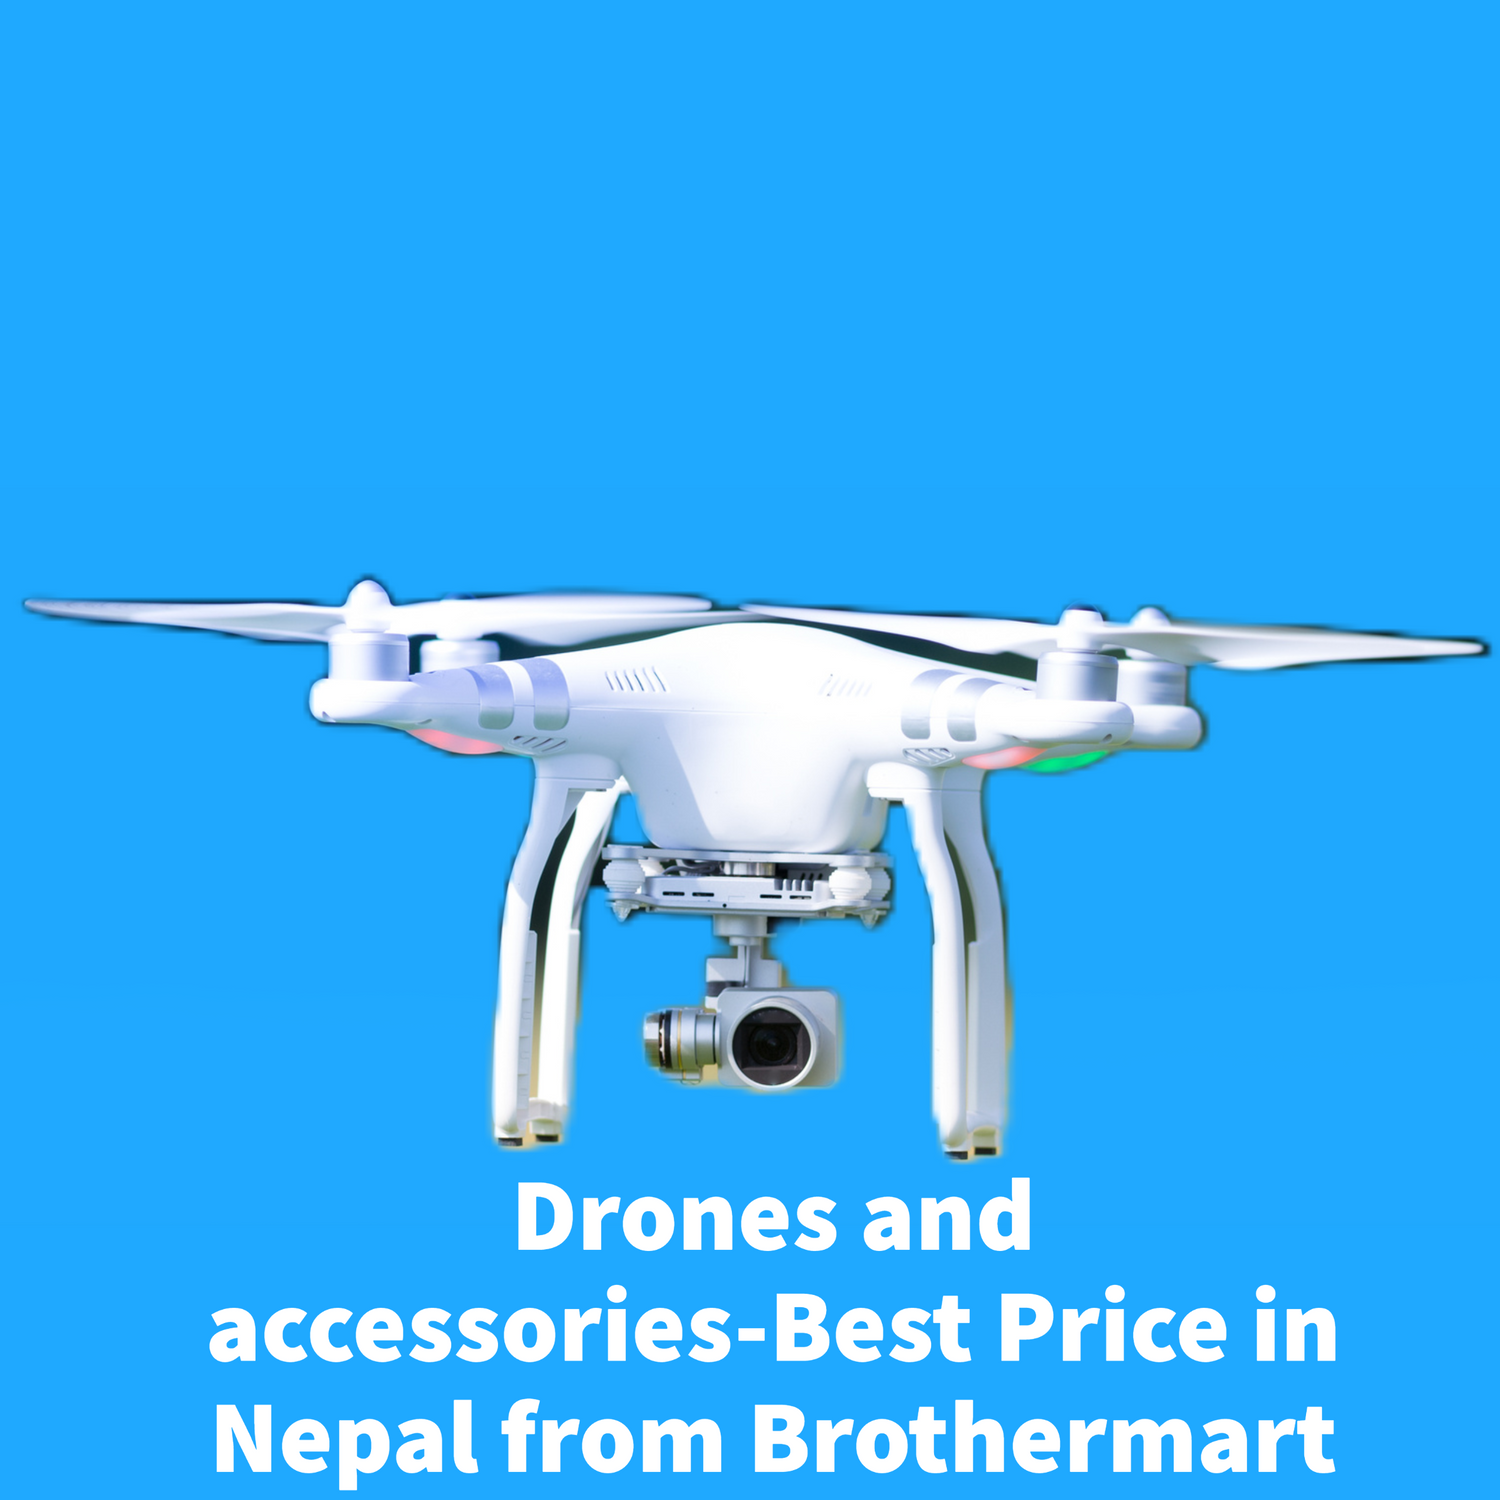 drones and accessories-Best price from brothermart